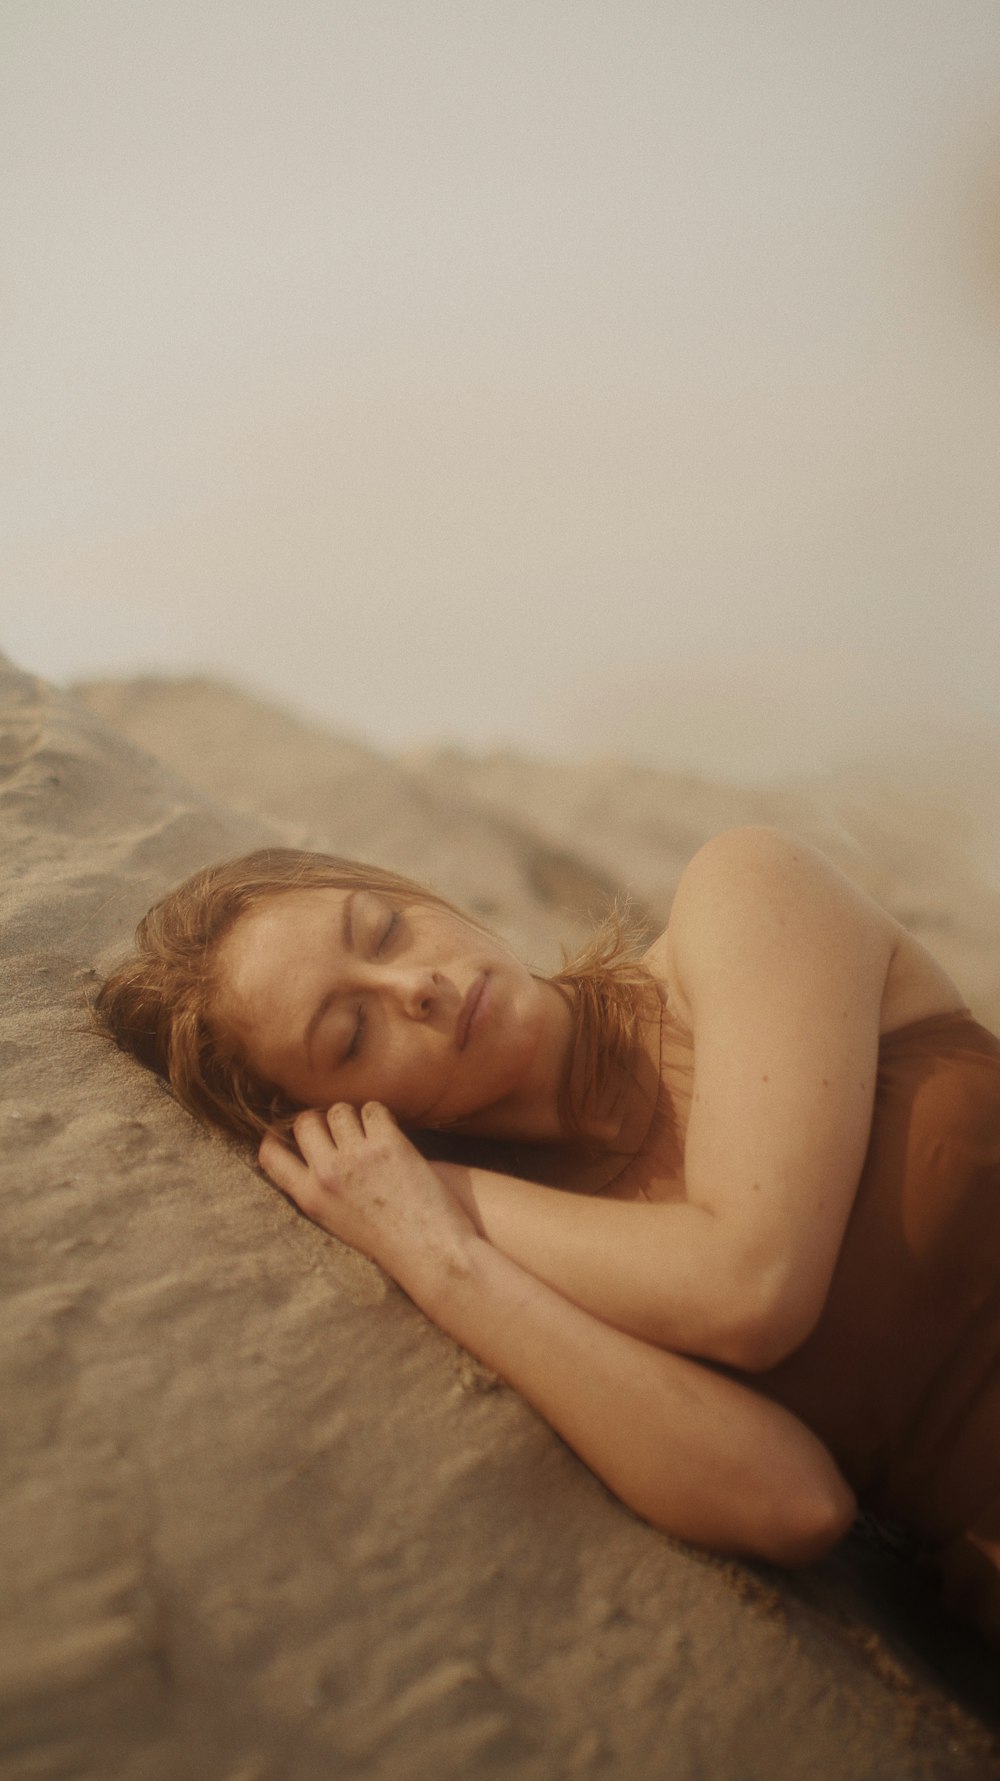 woman lying on brown sand during daytime